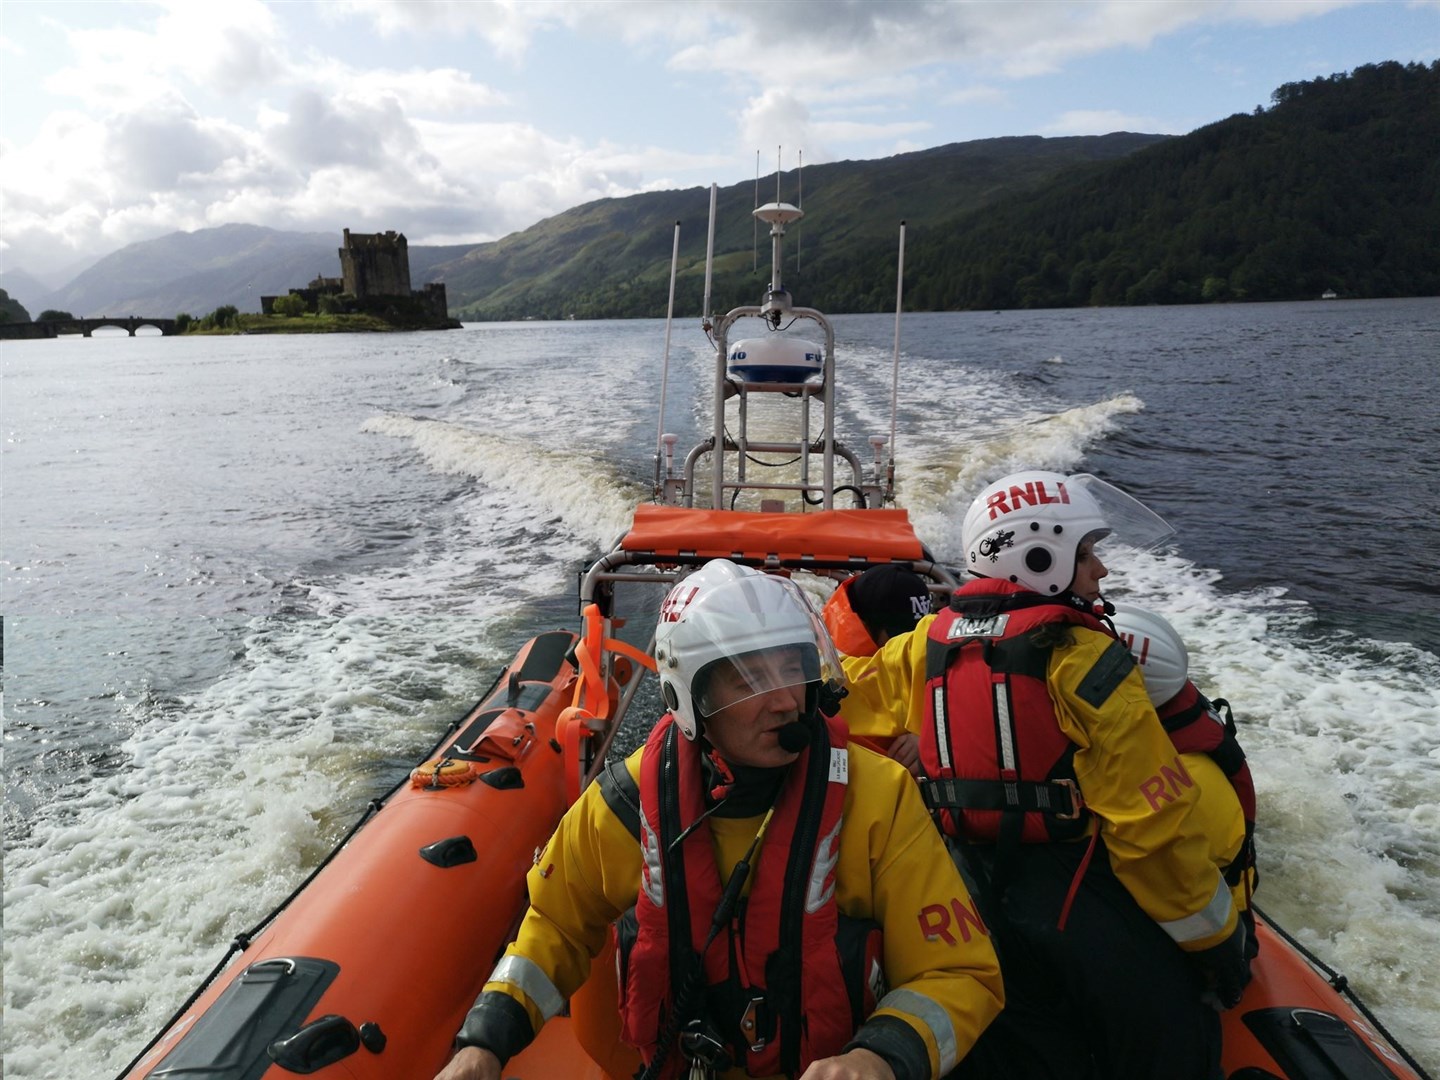 The Kyle RNLI lifeboat crew during their earlier call out to the Eilean Donan Castle area on Sunday. Picture: RNLI.